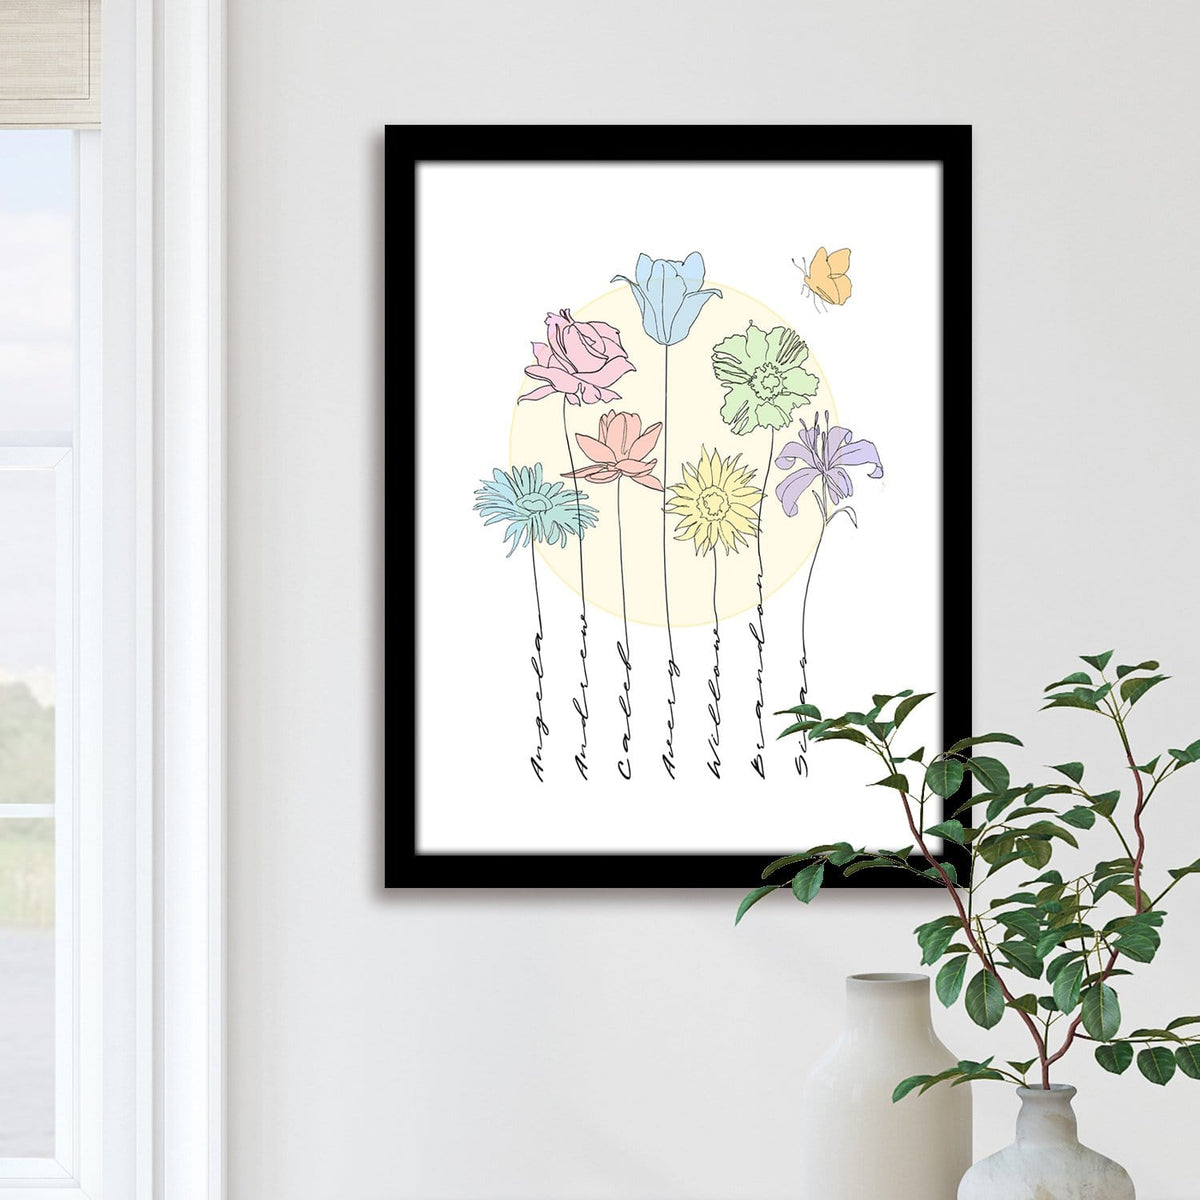 Personalized flower gift idea from Personal Prints. A gift that can be enjoyed for a lifetime